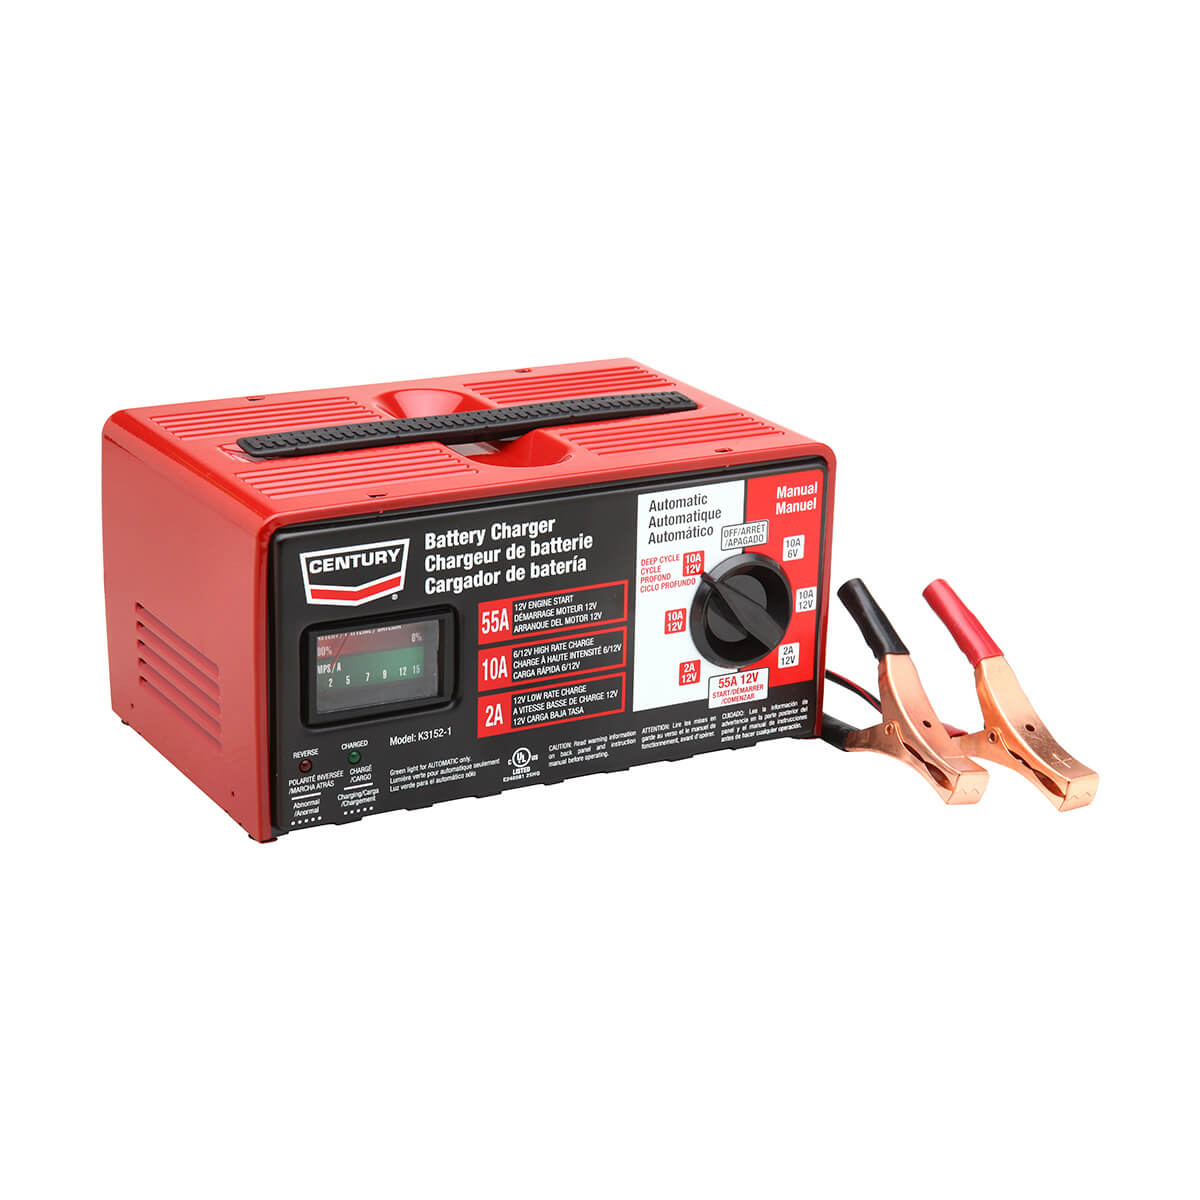 Century Battery Charger - 10/2/55 Amp